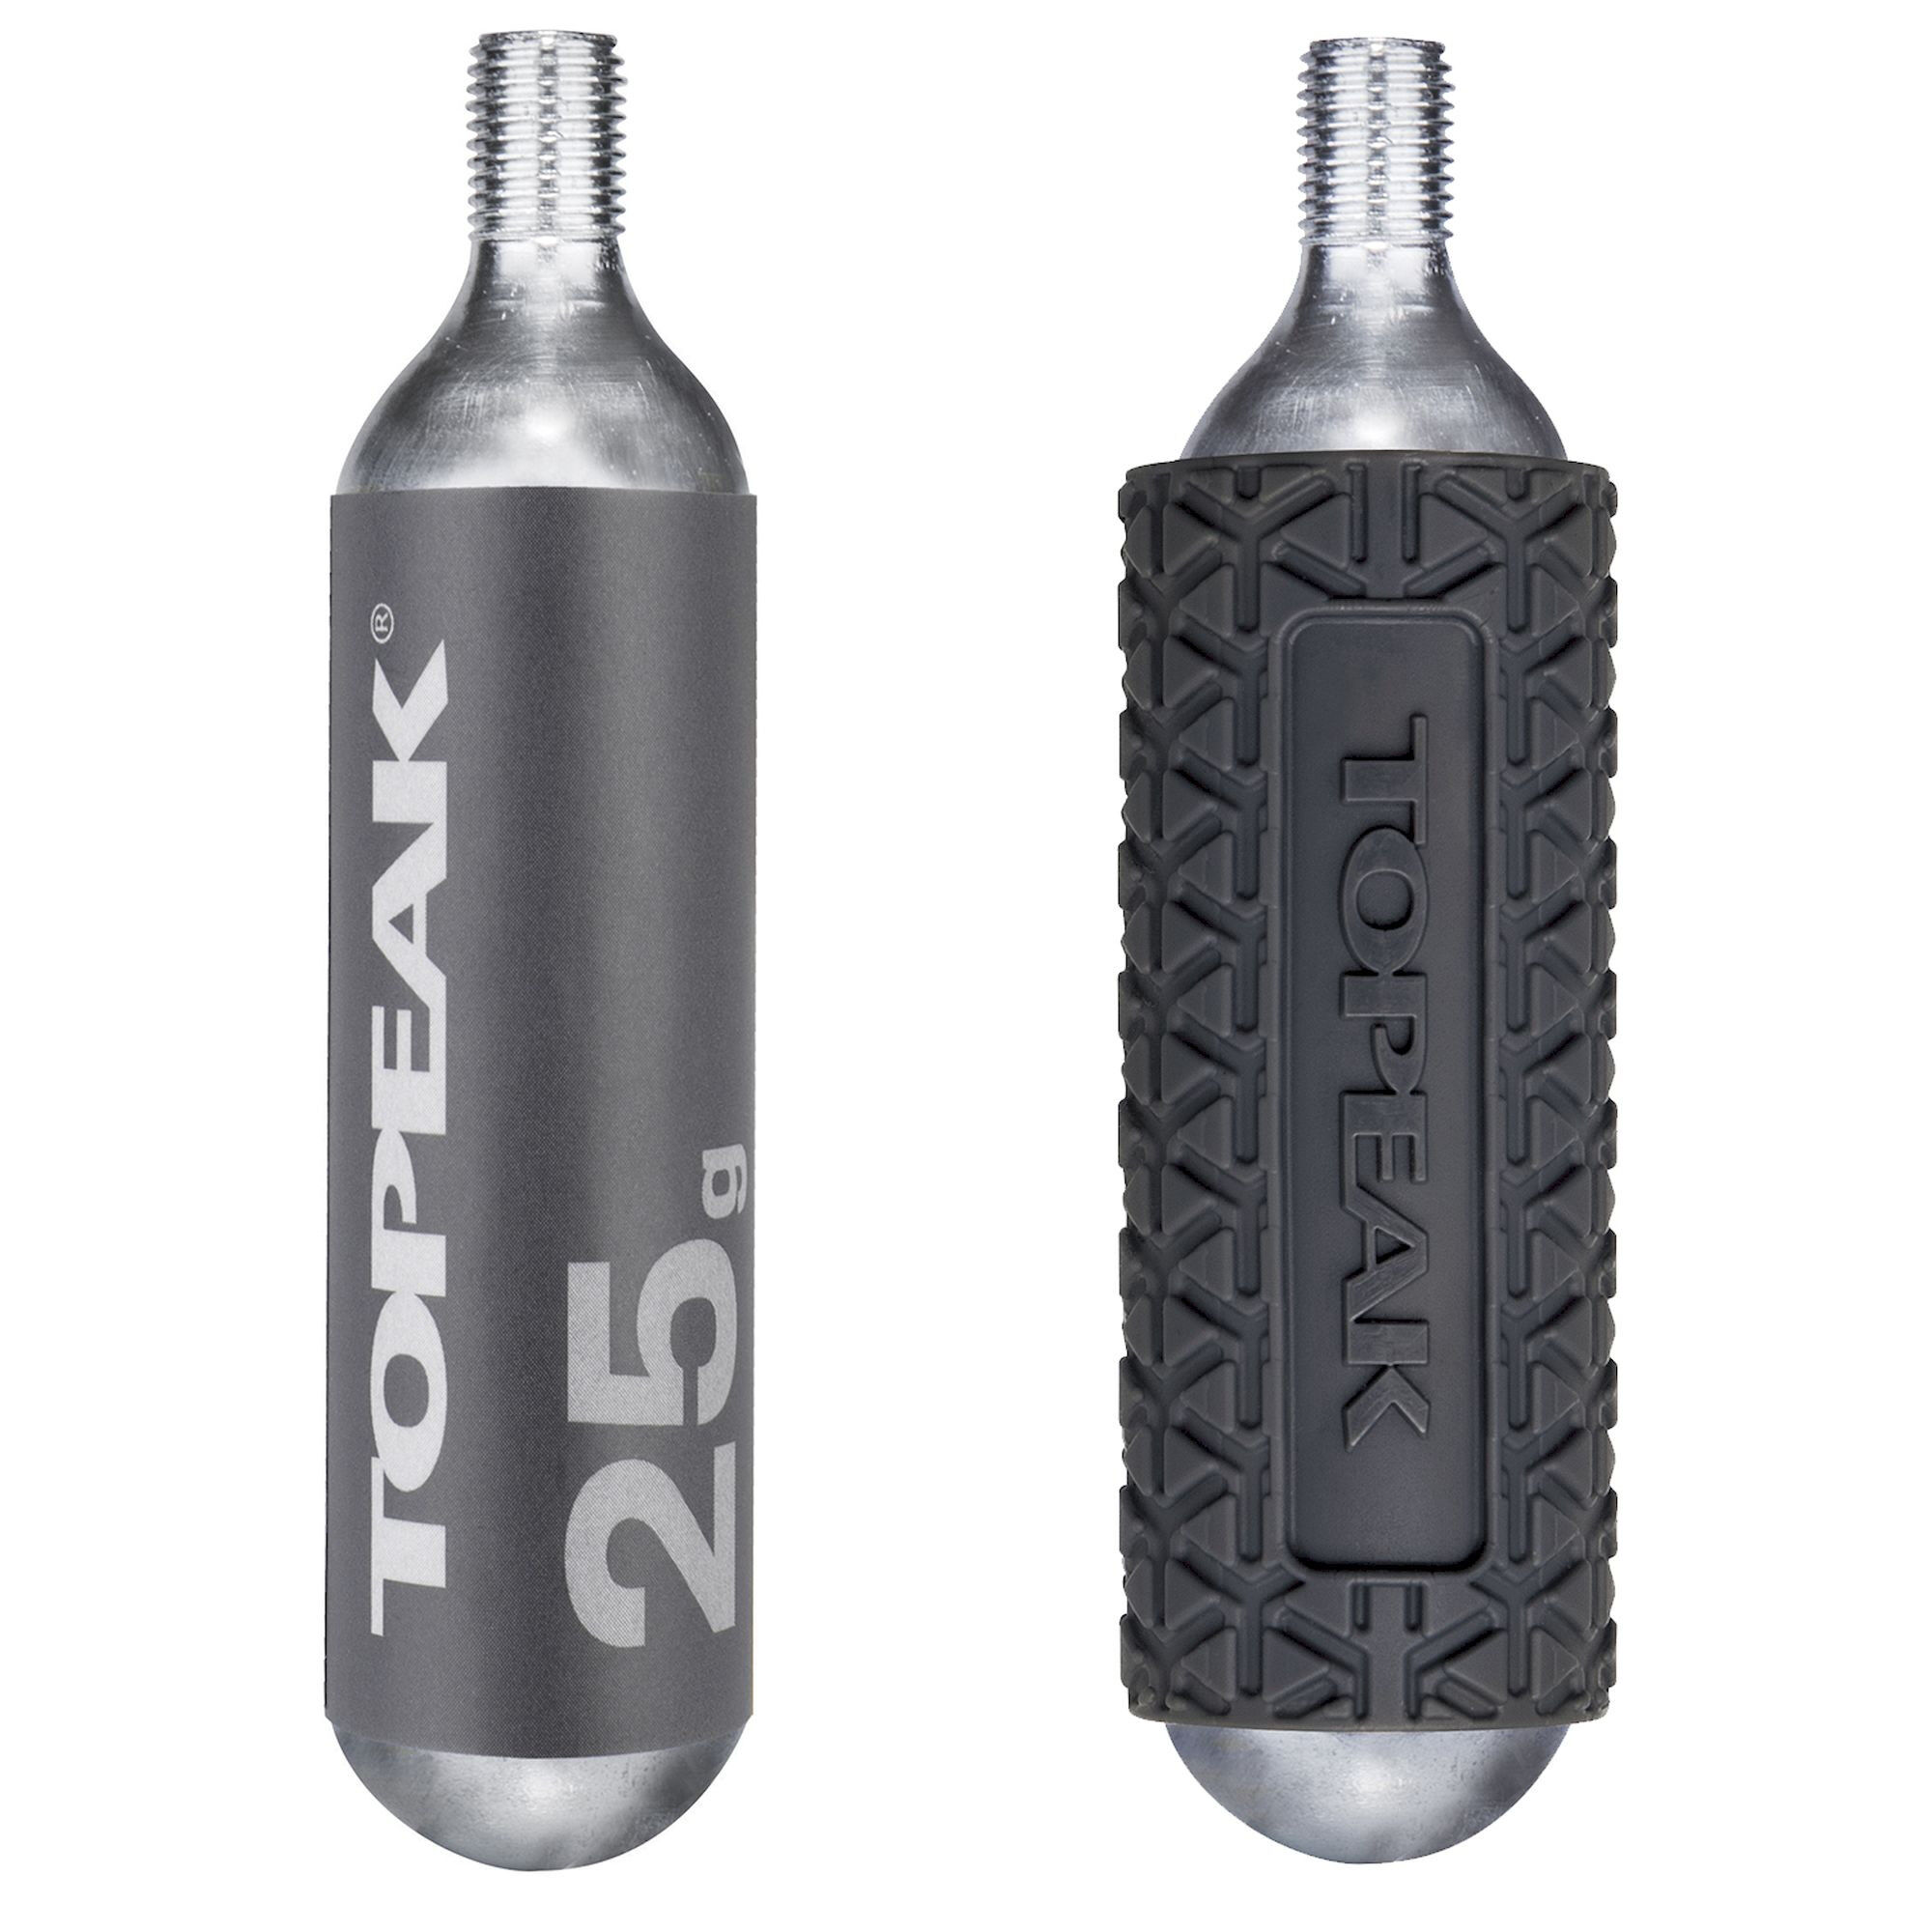 Topeak CO2 Cartridge 25g Threated (2 pieces w/ 1 cover) - Pompa a CO2 | Hardloop